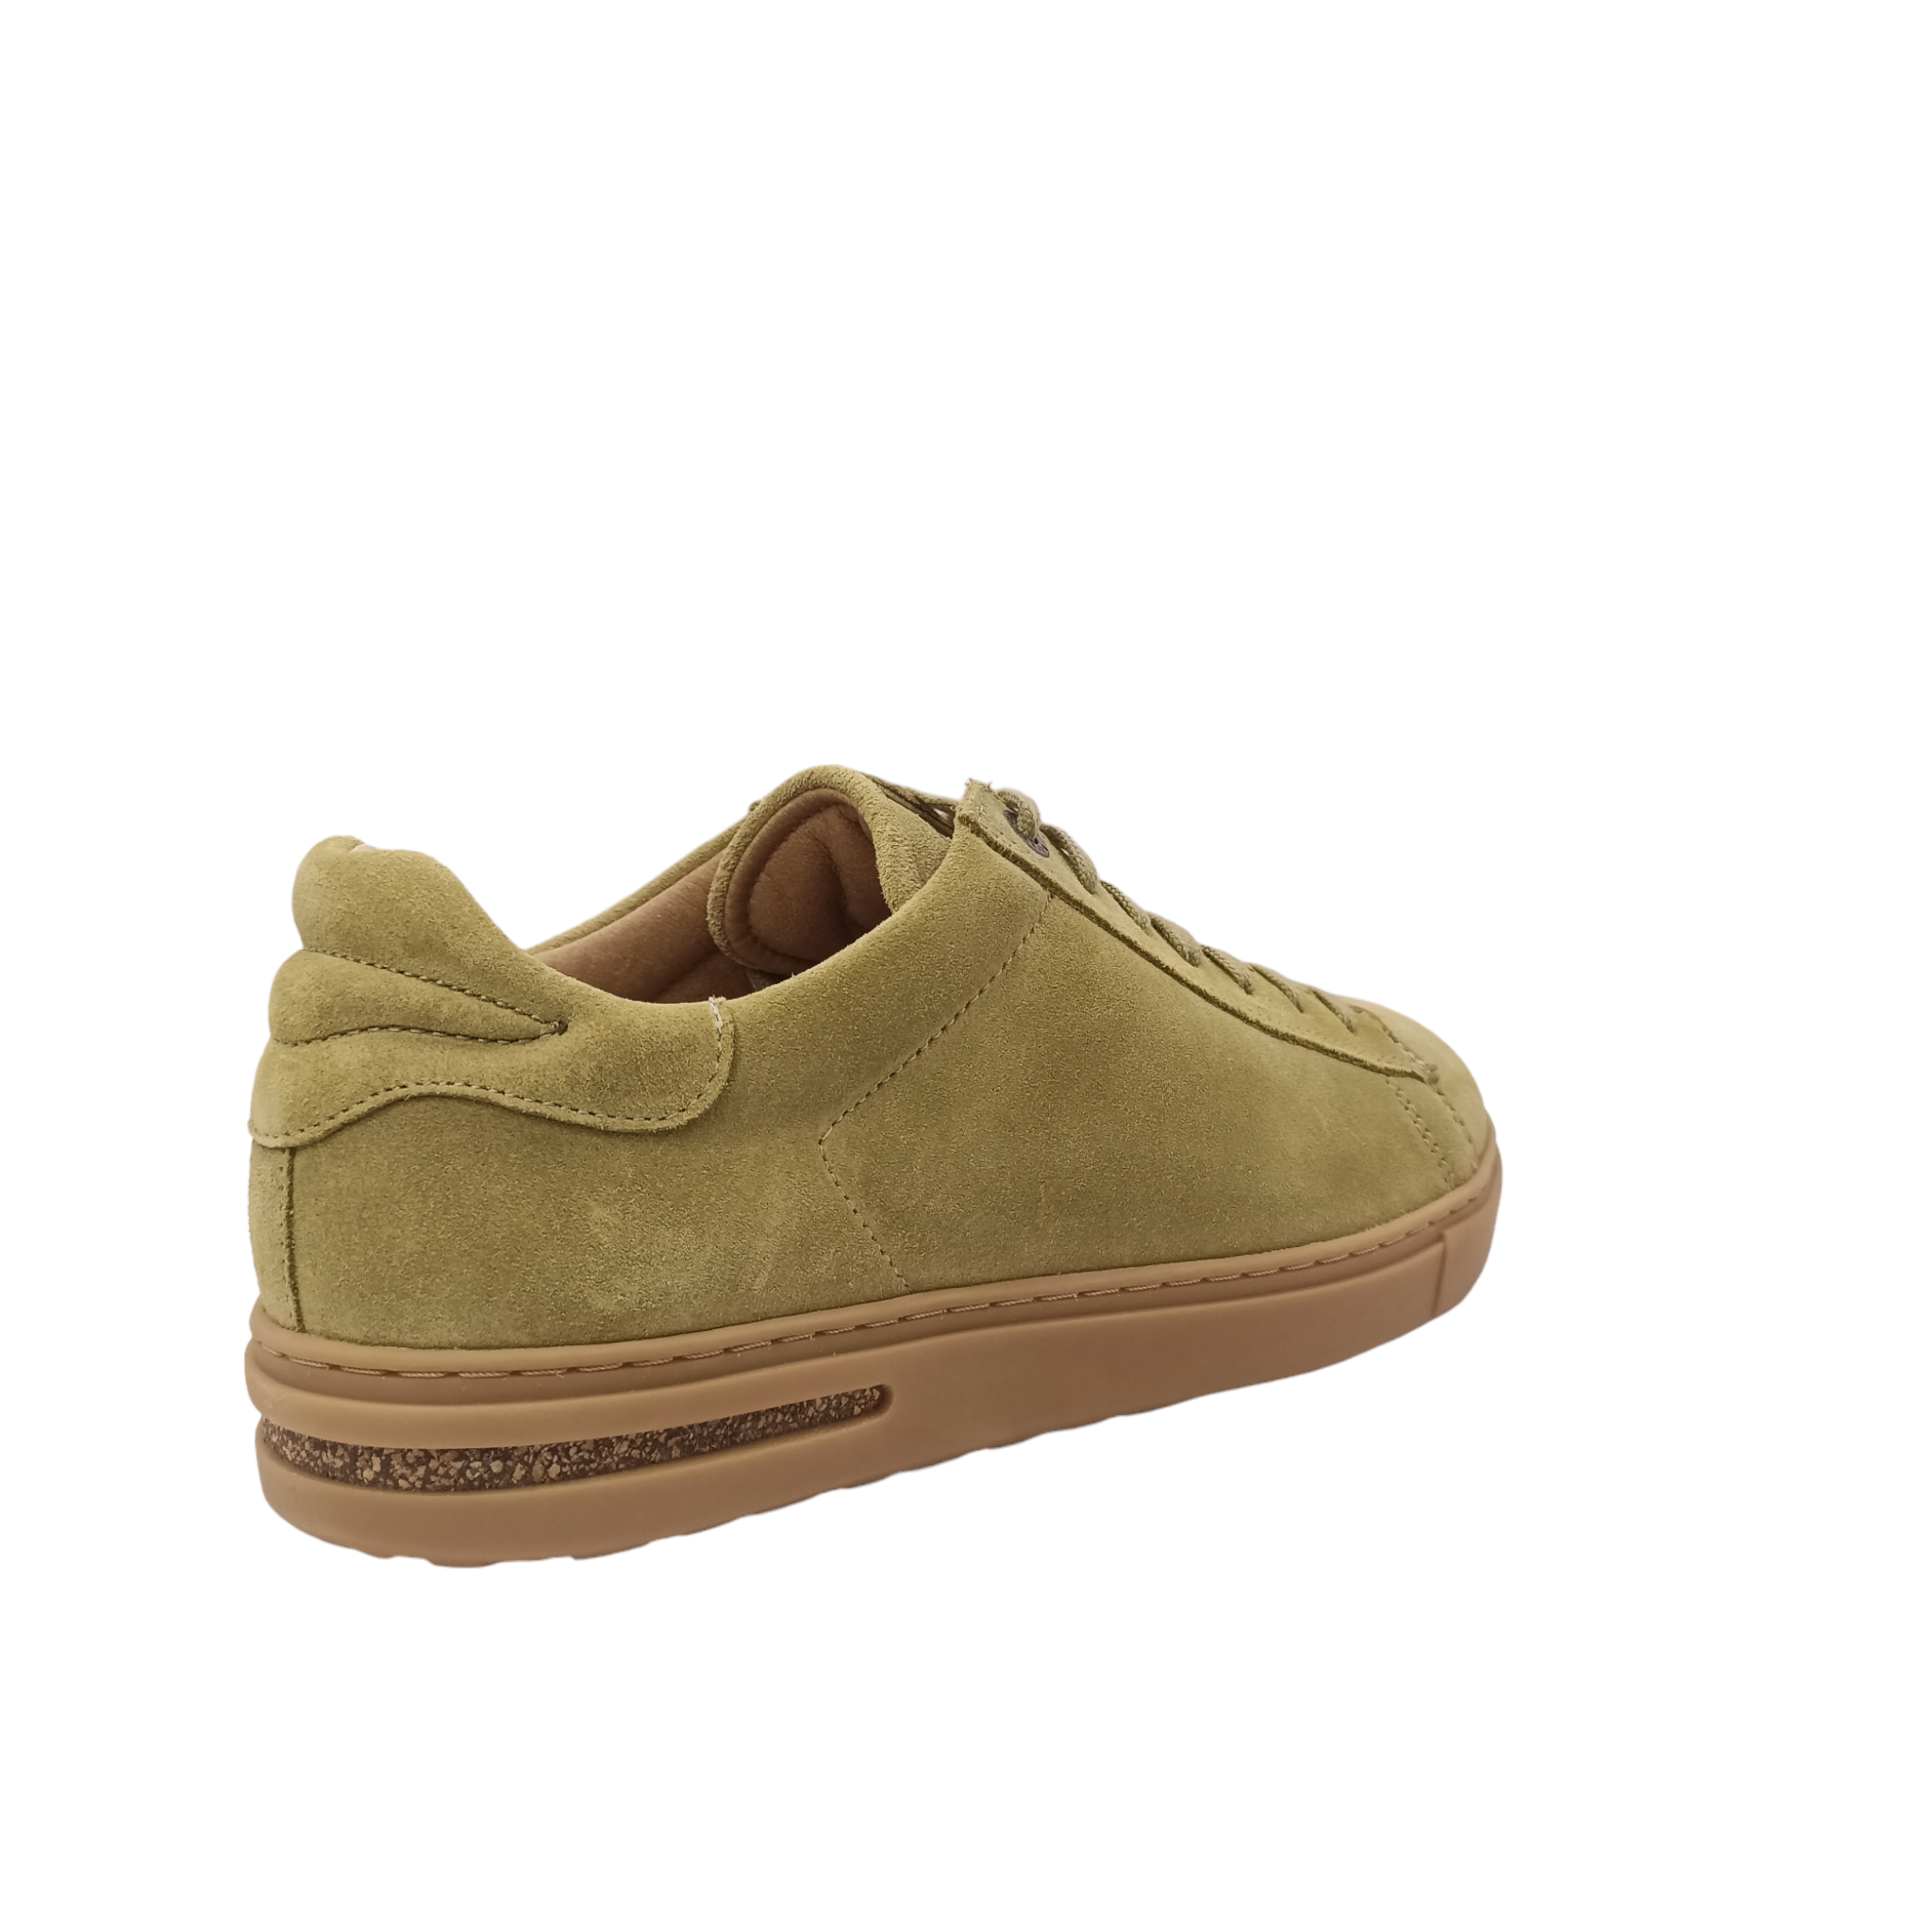 Shop Women&#39;s Birkenstock shoes. Back Angled view of Khaki Suede Sneaker with tan coloured sole with a small cork line around the heel. Green Laces with a padded heel. Shop Birkenstock Shoes Online and In-store with shoe&amp;me Mount Maunganui NZ